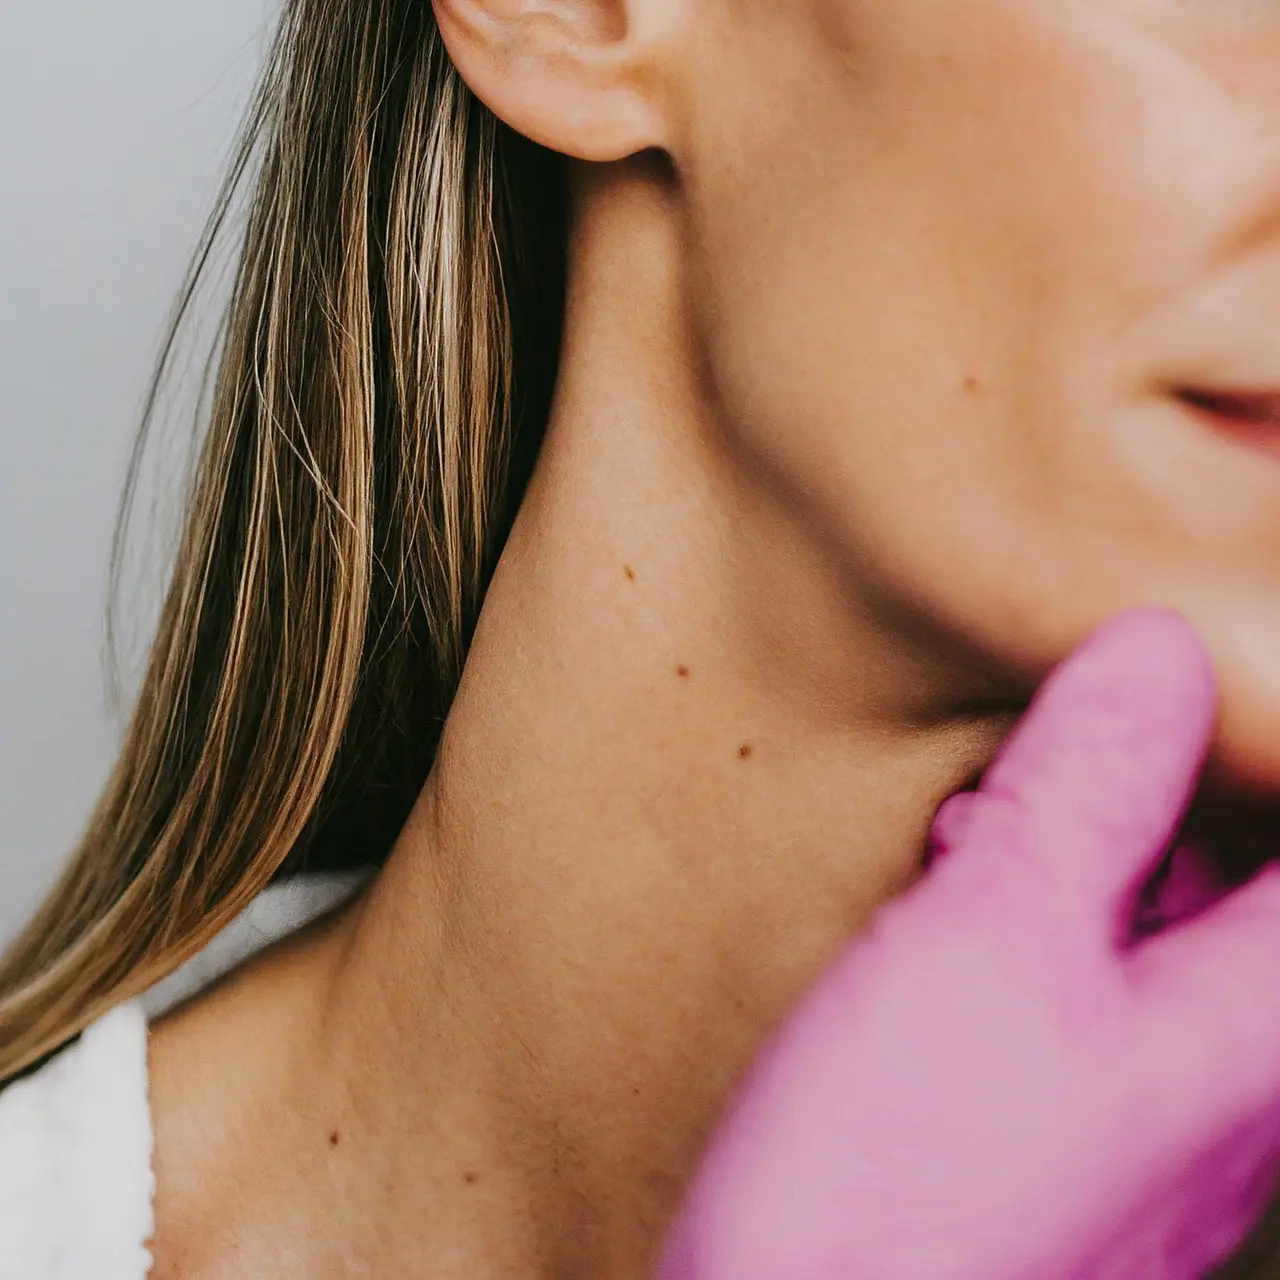 Transforming Skin Health: The Benefits of Dermatology as Specialty Care